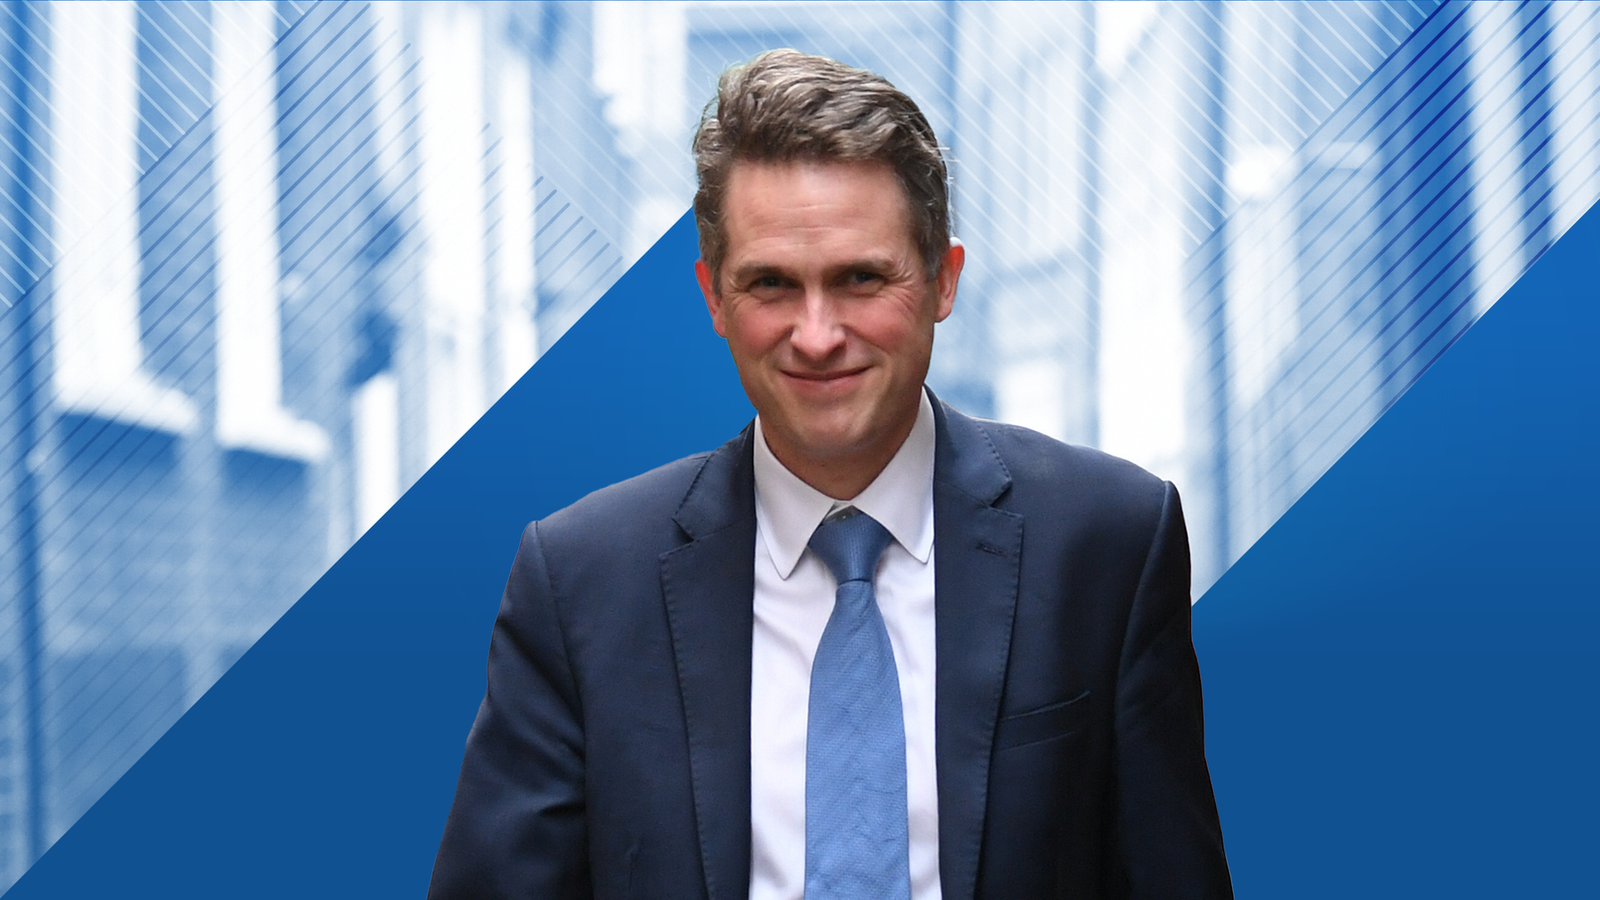 Timeline: How did Sir Gavin Williamson go from cabinet to kerb?